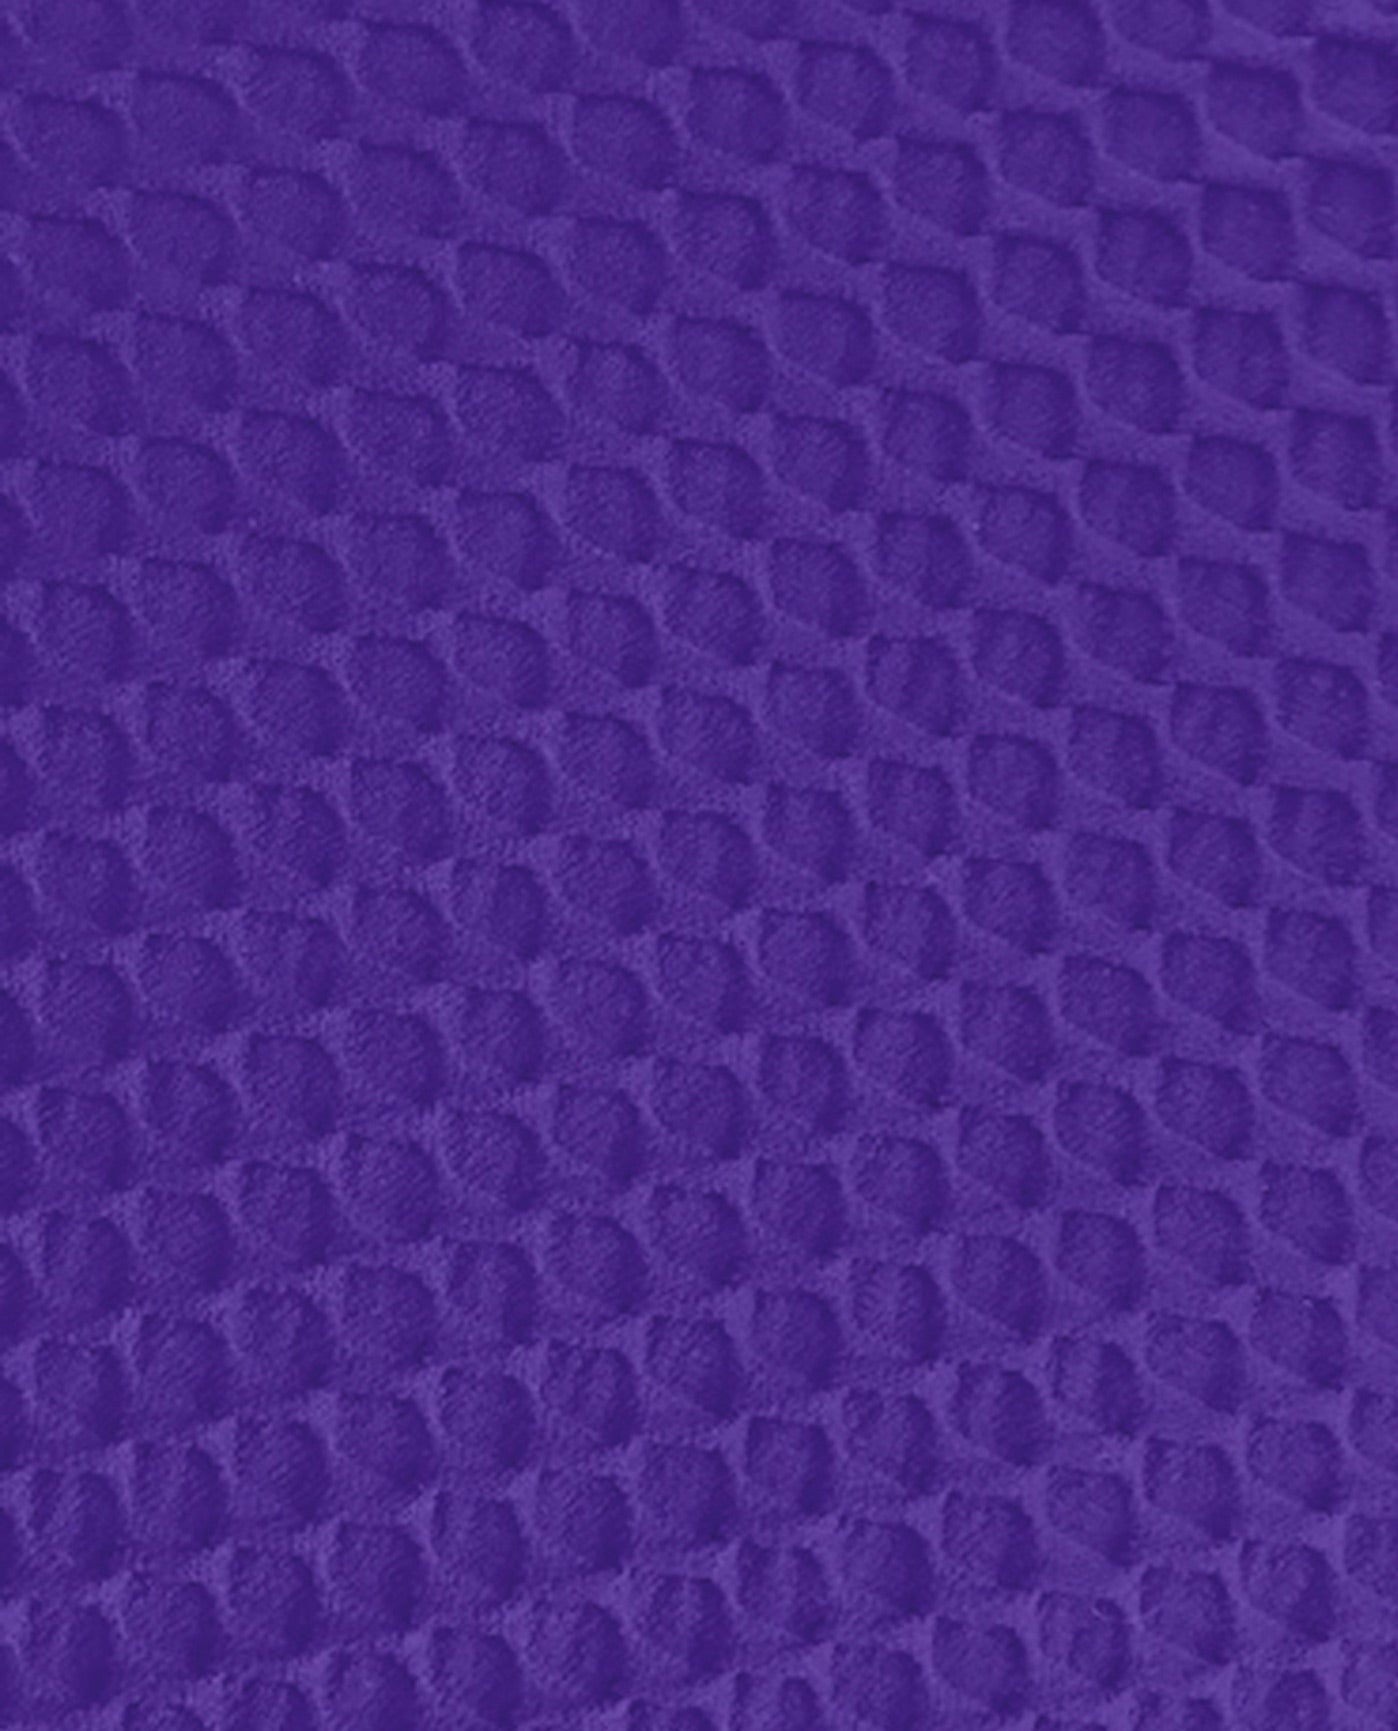 FABRIC SWATCH VIEW OF CHLORINE RESISTANT AQUAMORE COLOR BLOCK TEXTURED SPORTY PLUS SIZE SWIMSUIT | 618 AQT TEXTURED PURPLE